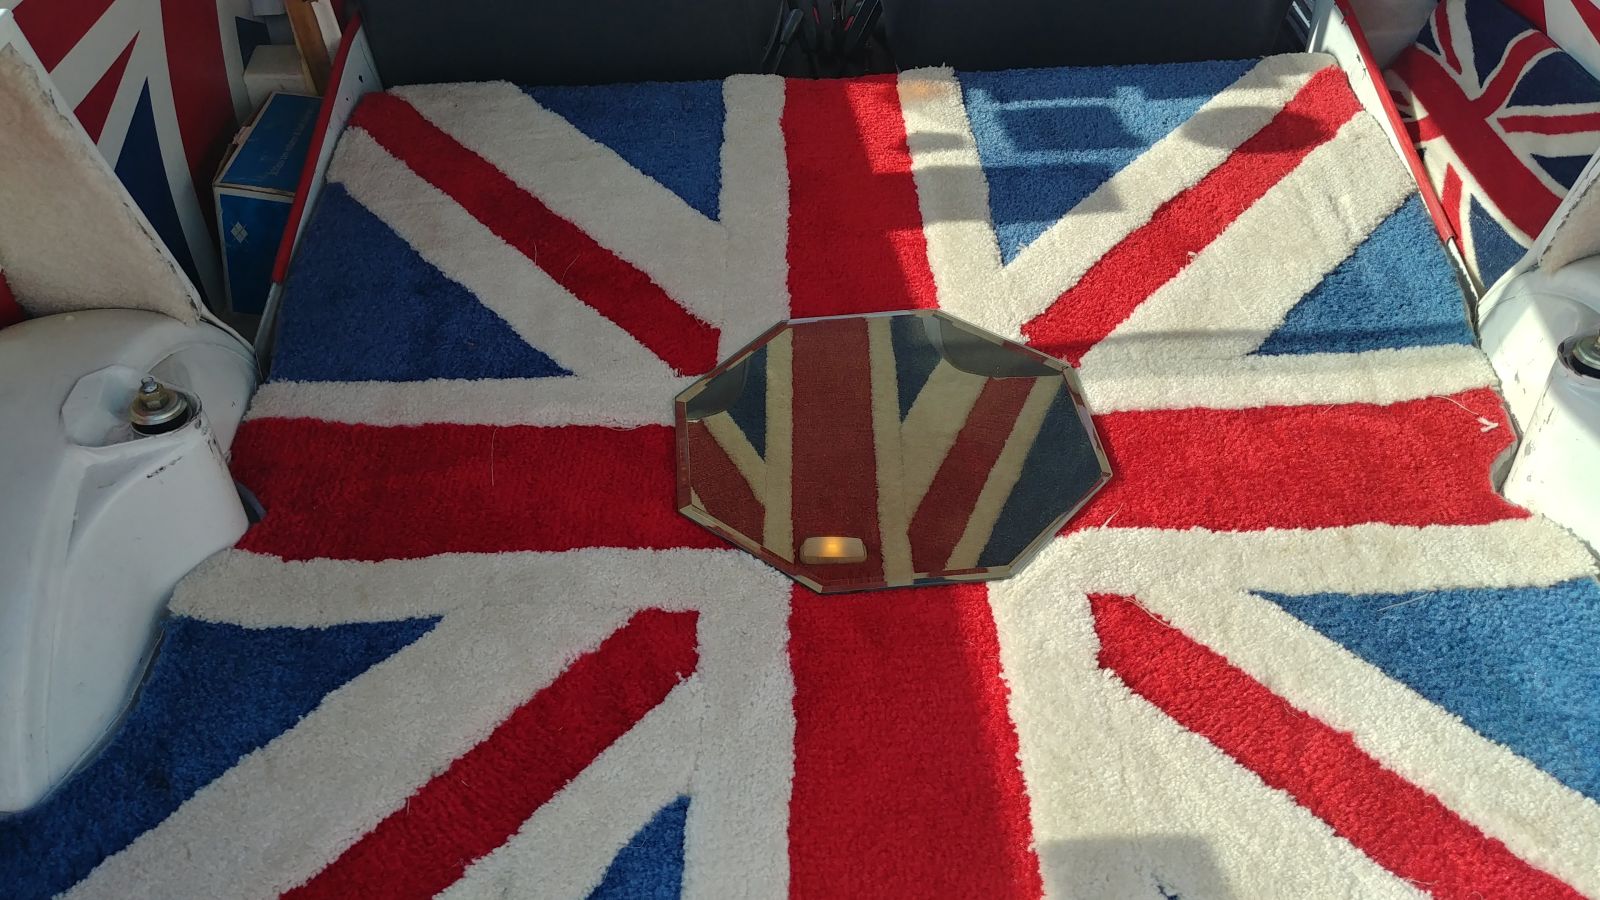 Carpet was furnished in the Union Jack. Look at the mirror, it’s the Union Jack as well.